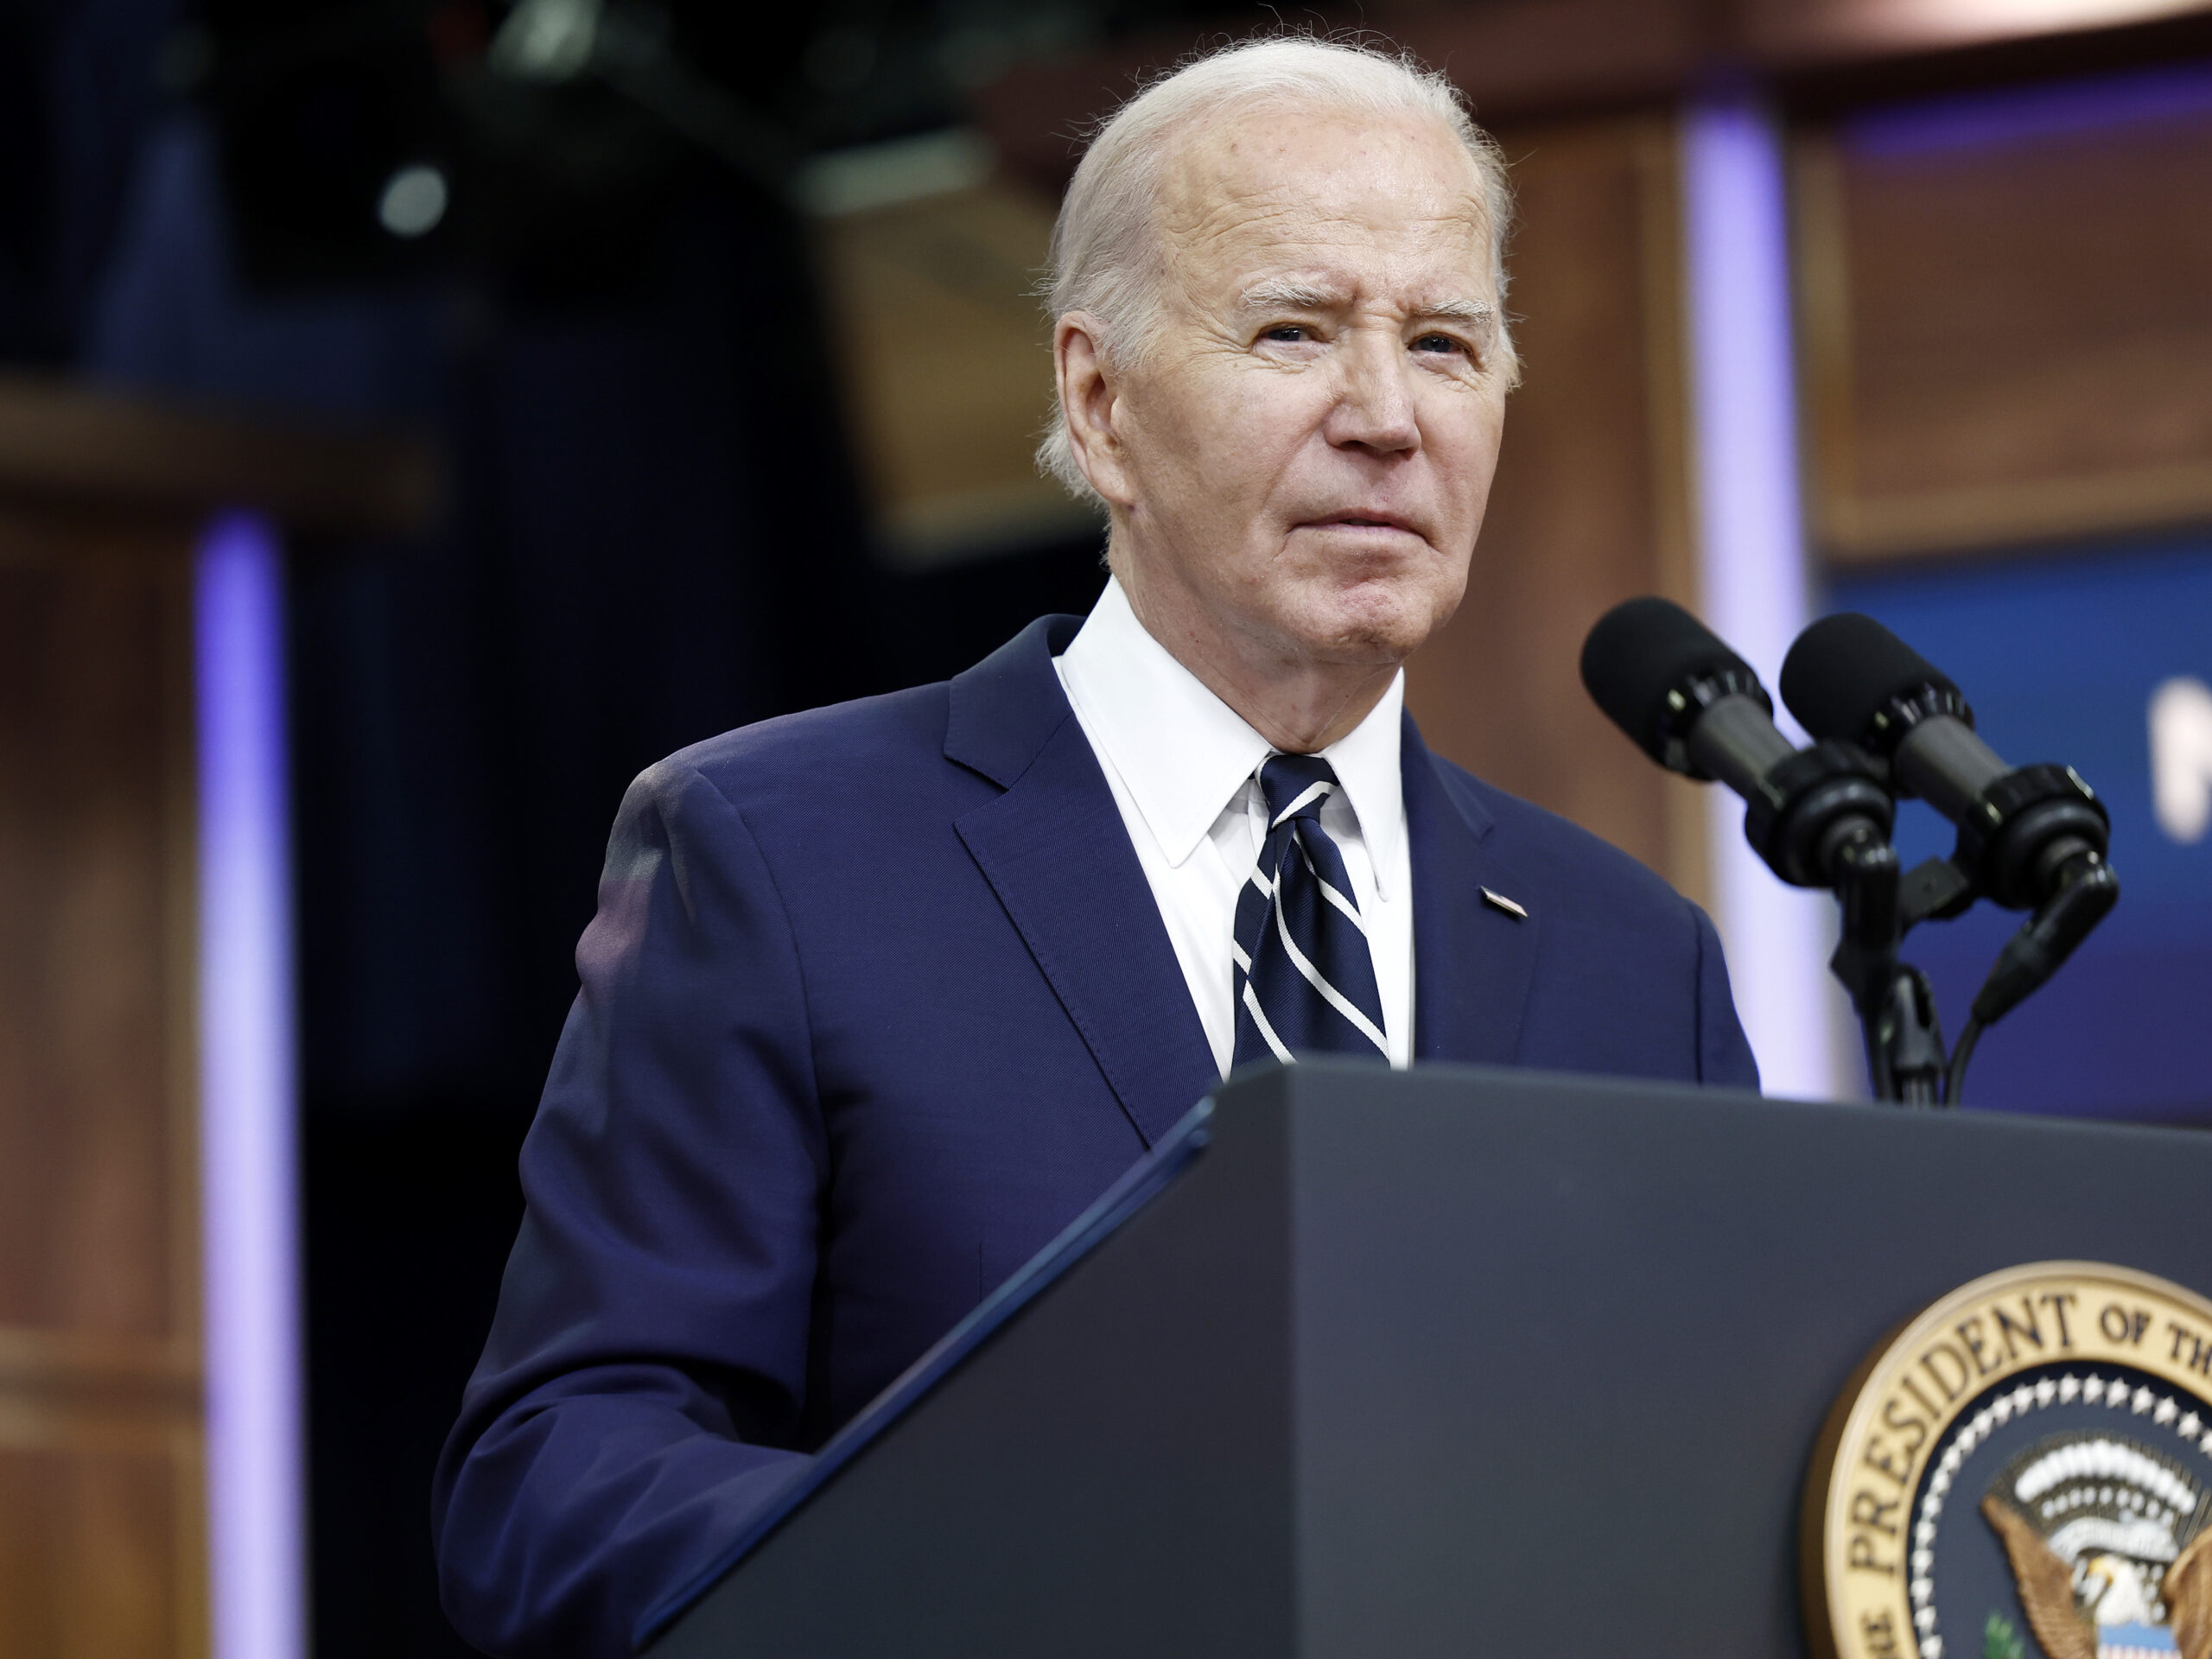 President Biden briefly spoke to reporters about Iran in the South Court auditorium in the Eisenhower Executive Office Building on Friday.